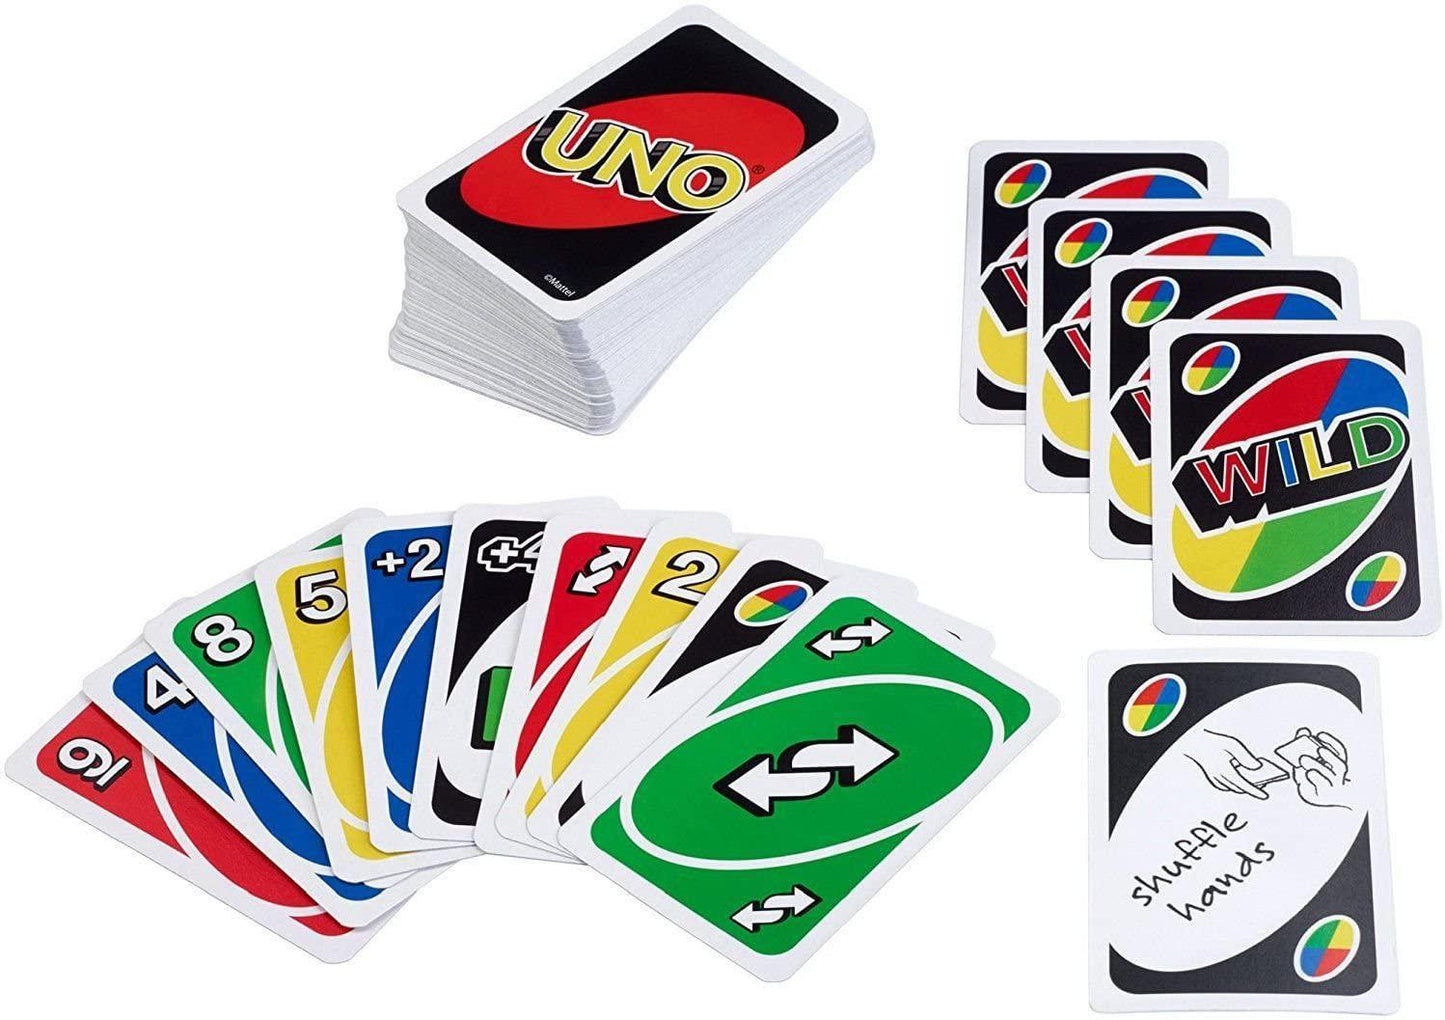 Mattel Games UNO Card Game Customizable with Wild Cards (42003)